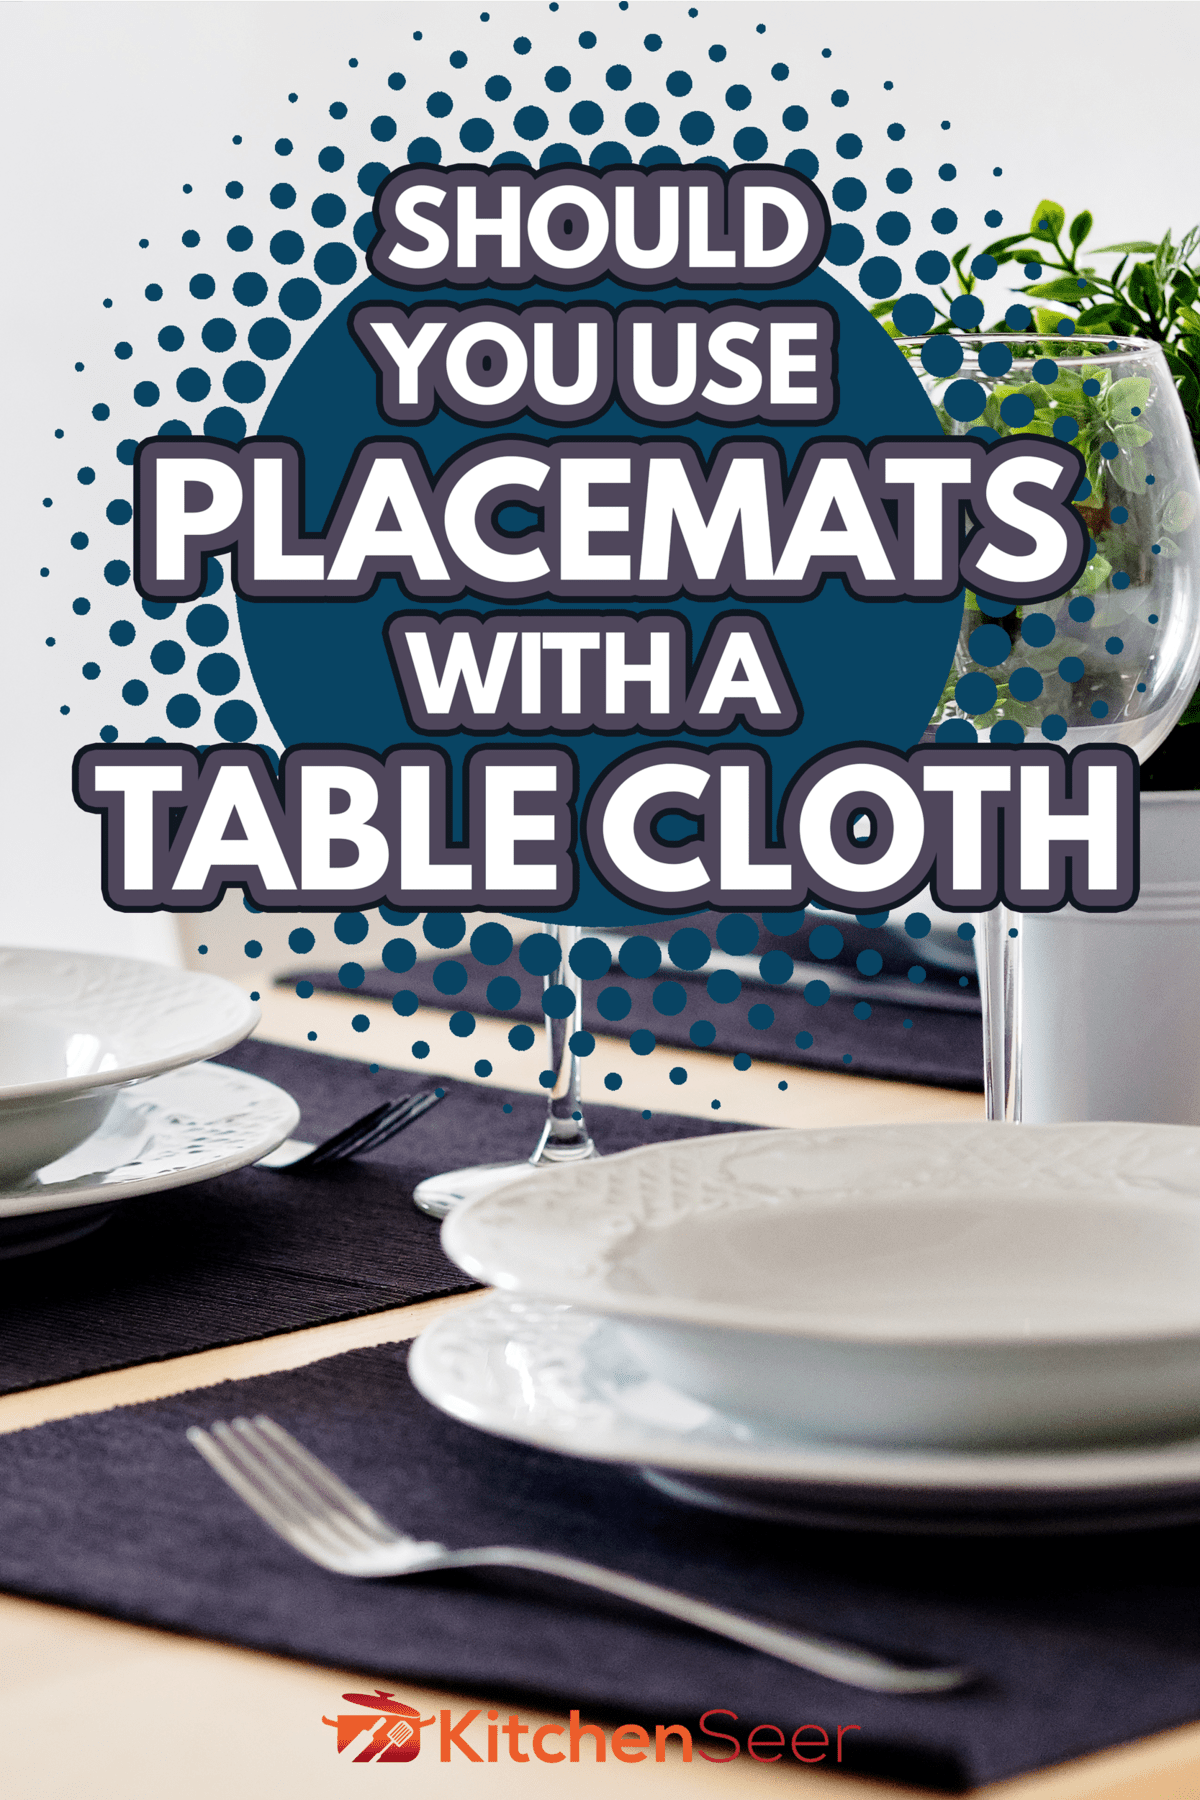 able settings wait for guests at home or restaurant artificial potted plant for decoration - Should You Use Placemats With A Tablecloth?